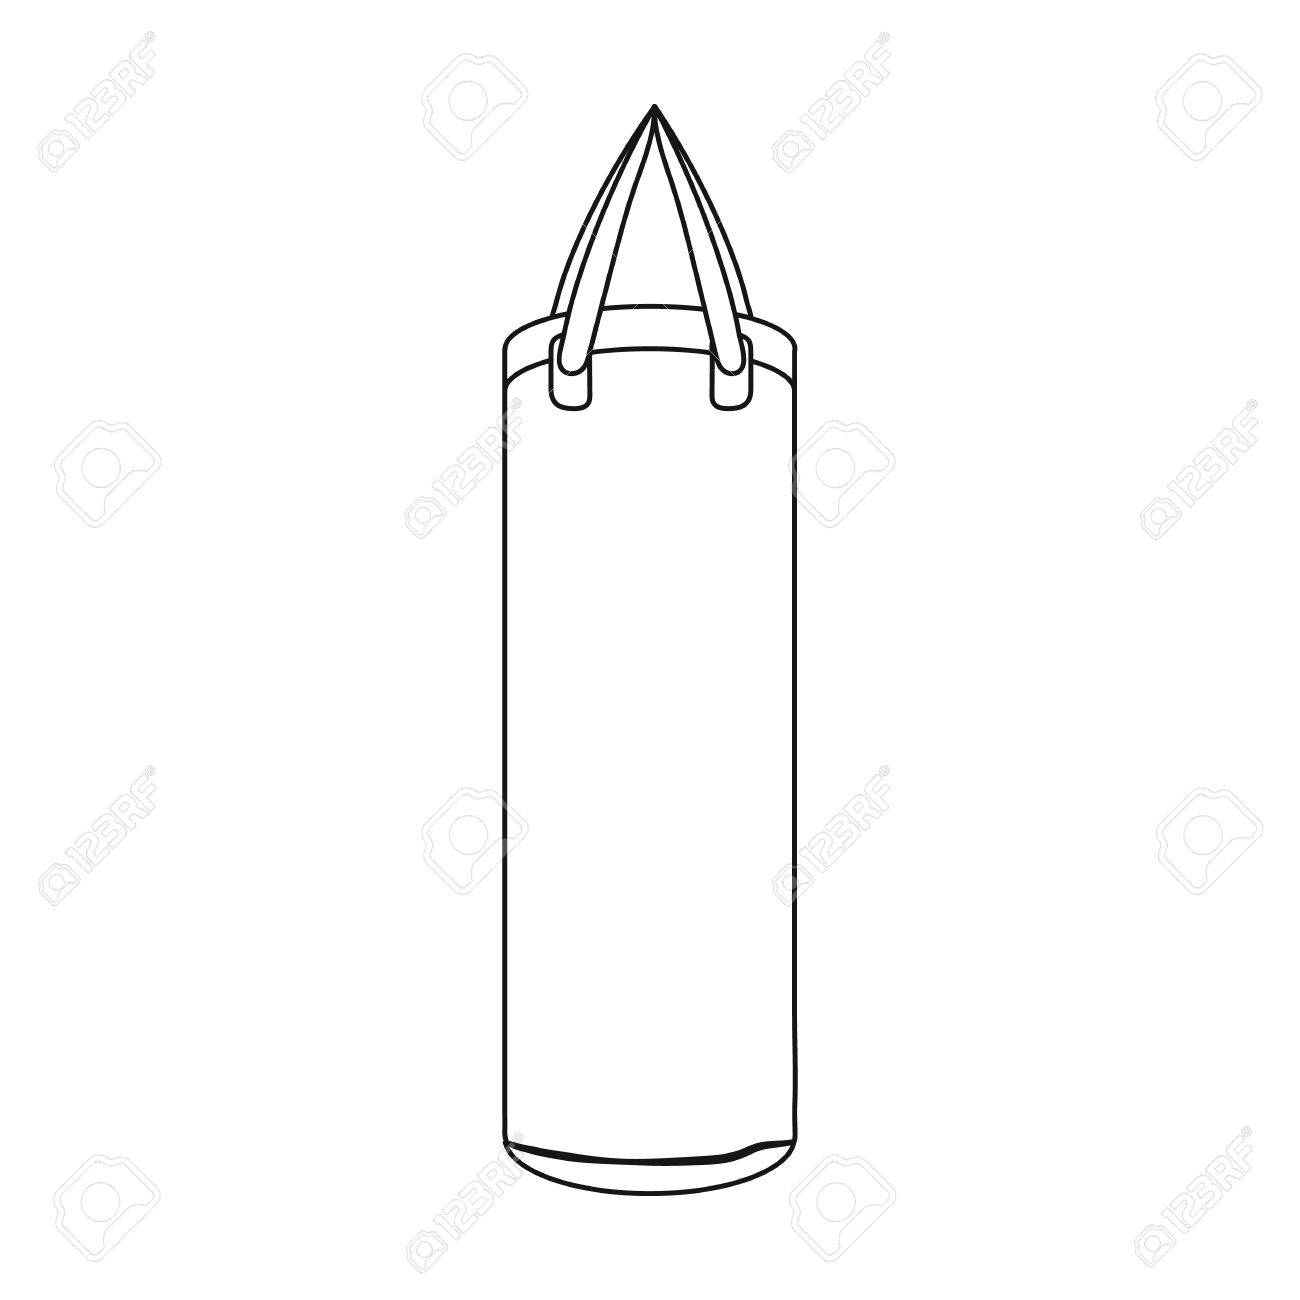 Boxing punching bag icon in outline style isolated on white background.